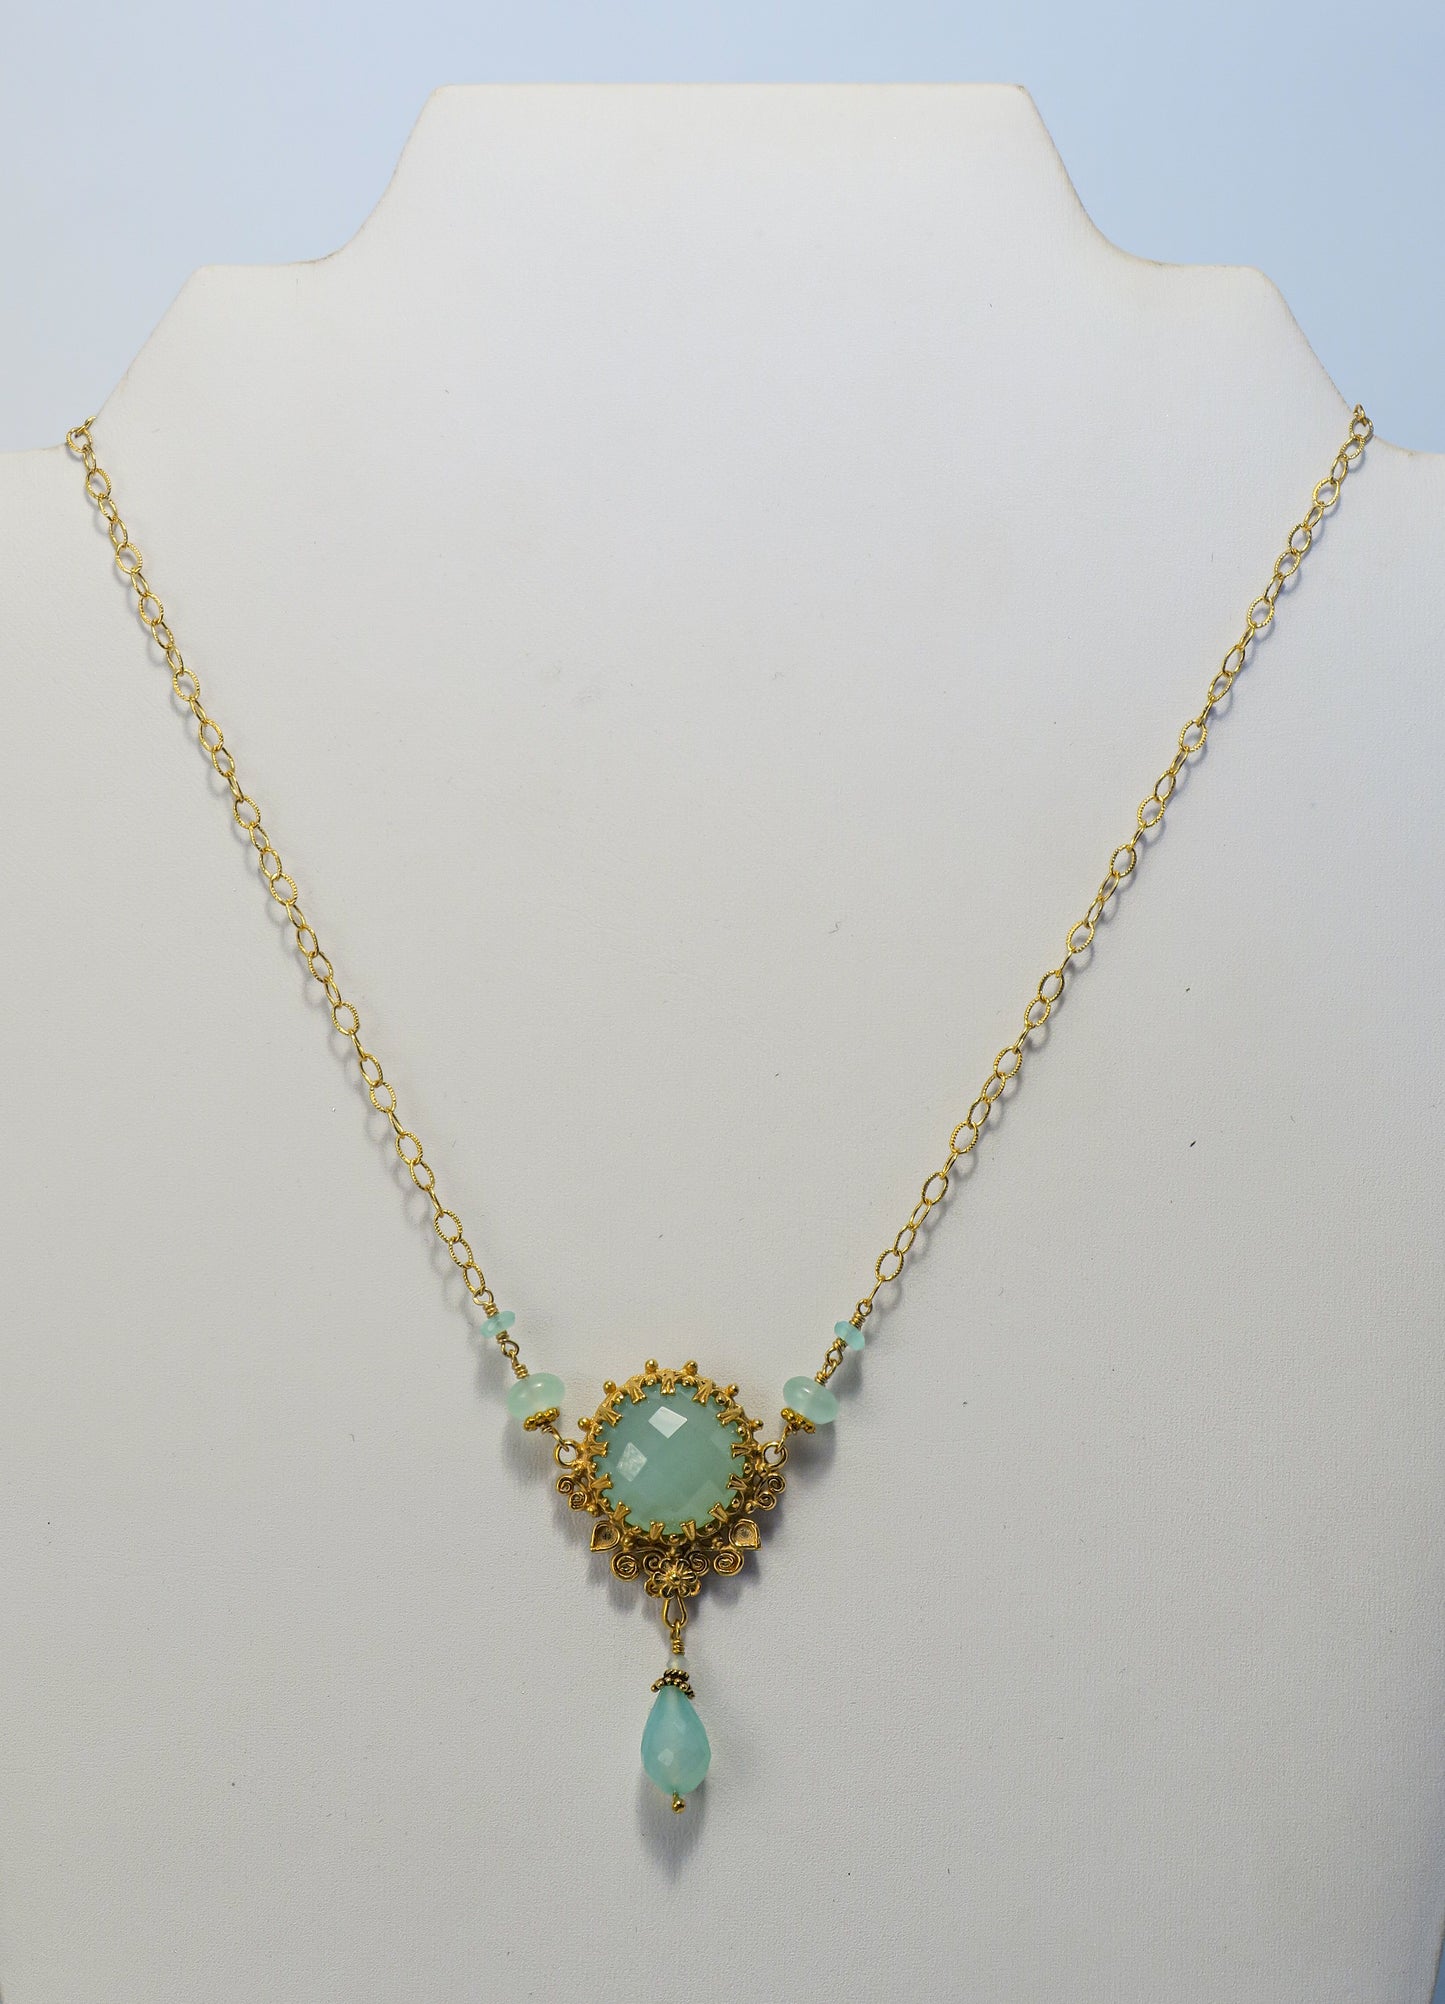 18K Gold Vermeil and Aqua Chalcedony Necklace | by Vanessa Mellet